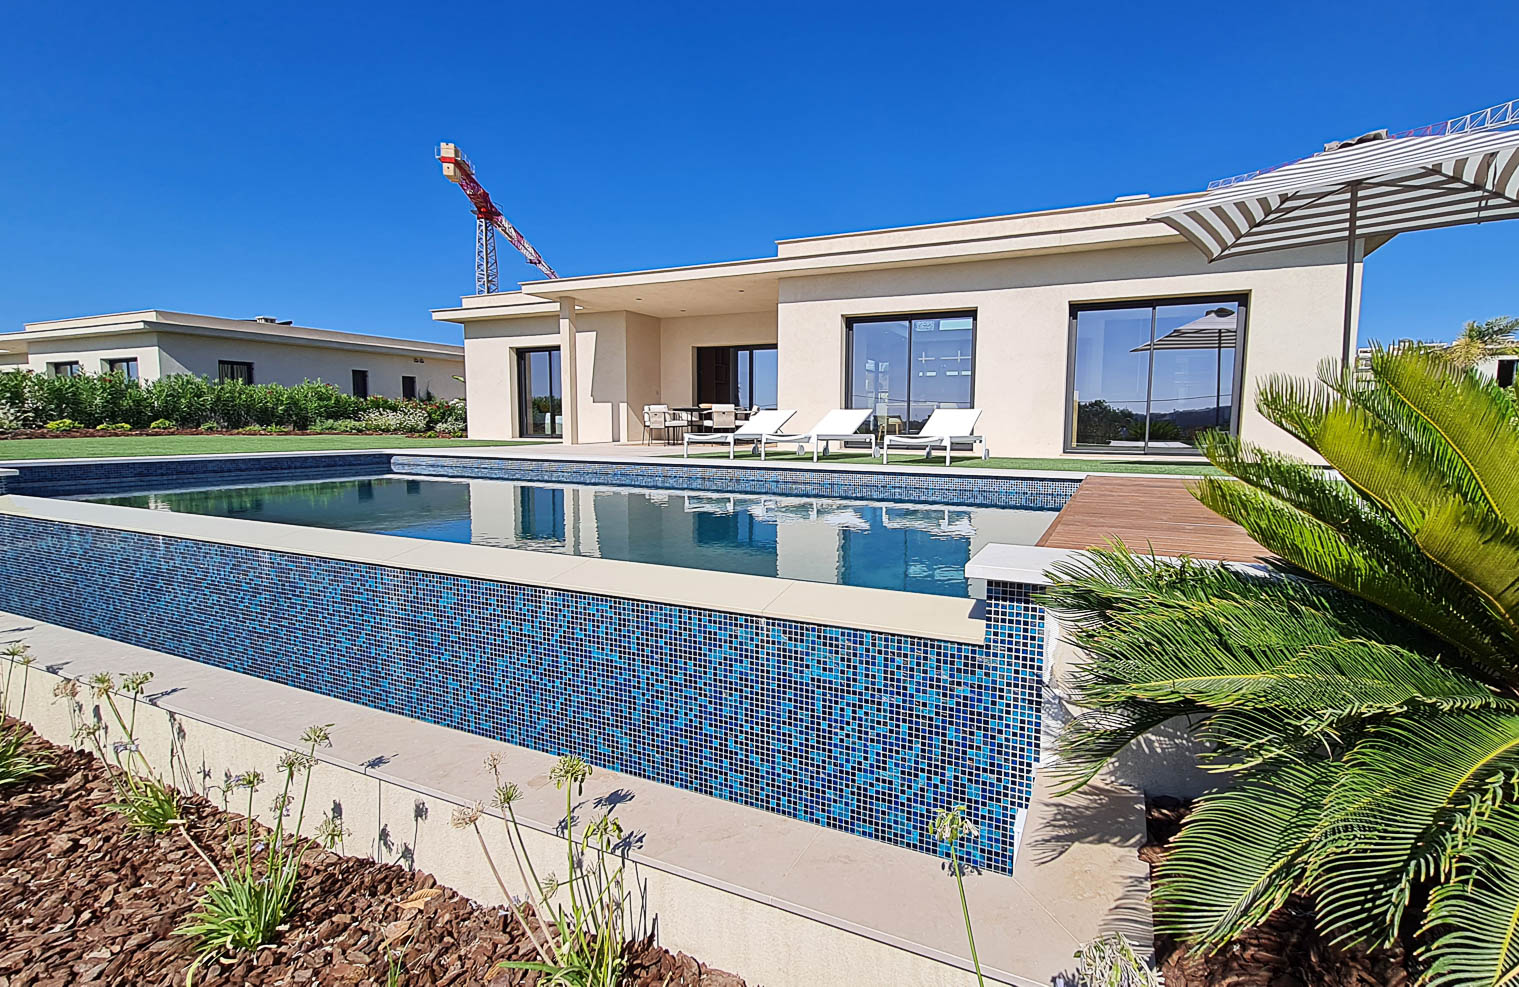 New Luxury  4 Bedroom Villa with Private Pool and Garage, in Gated Estate, Faro